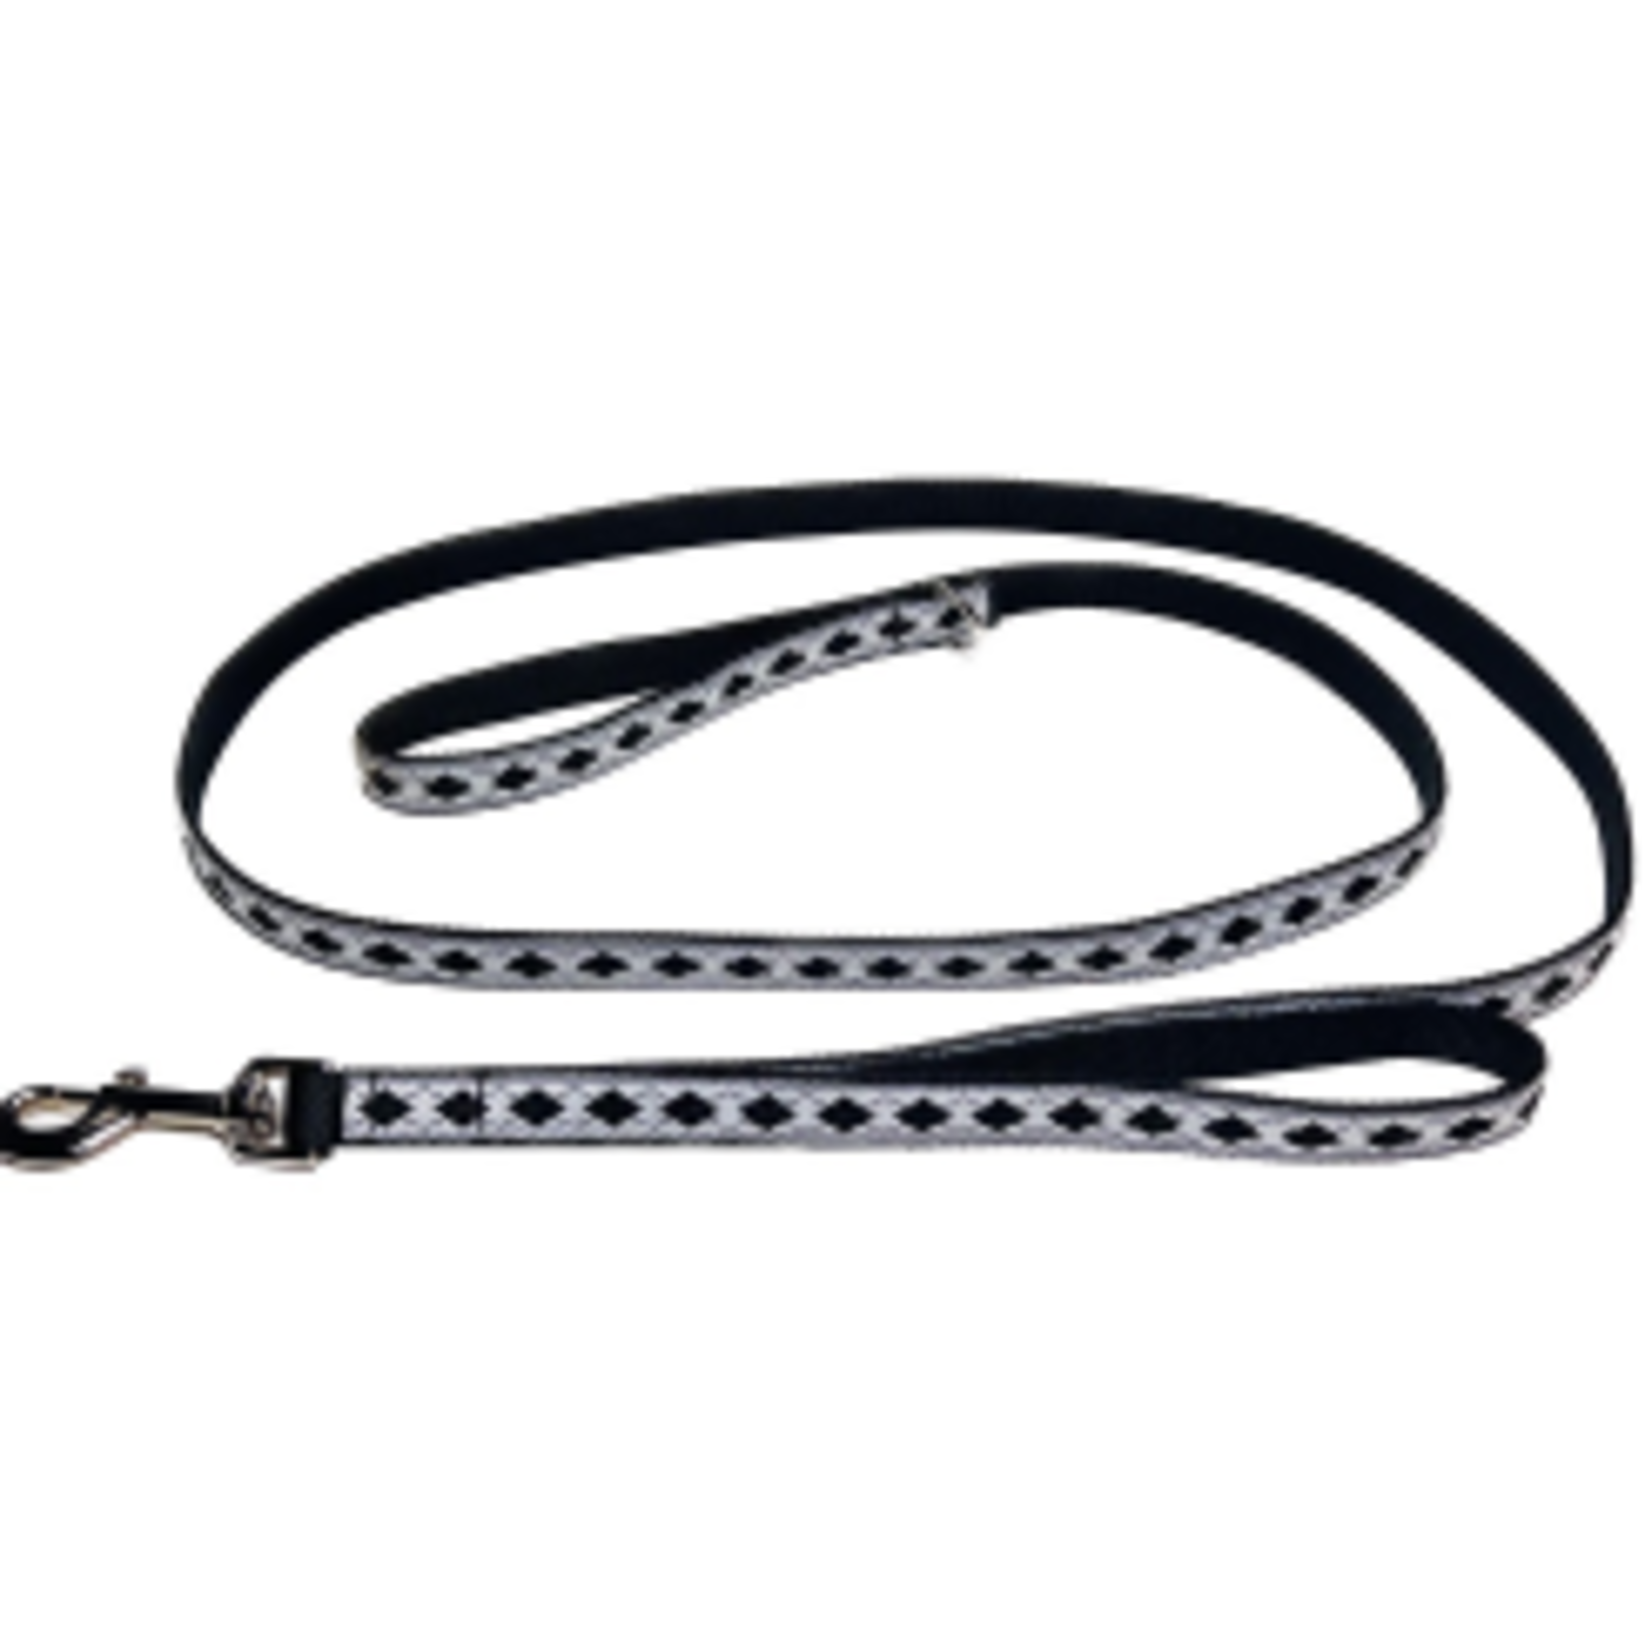 Hunter Brand Patterned Nylon Leash with Traffic Handle - 6 ft